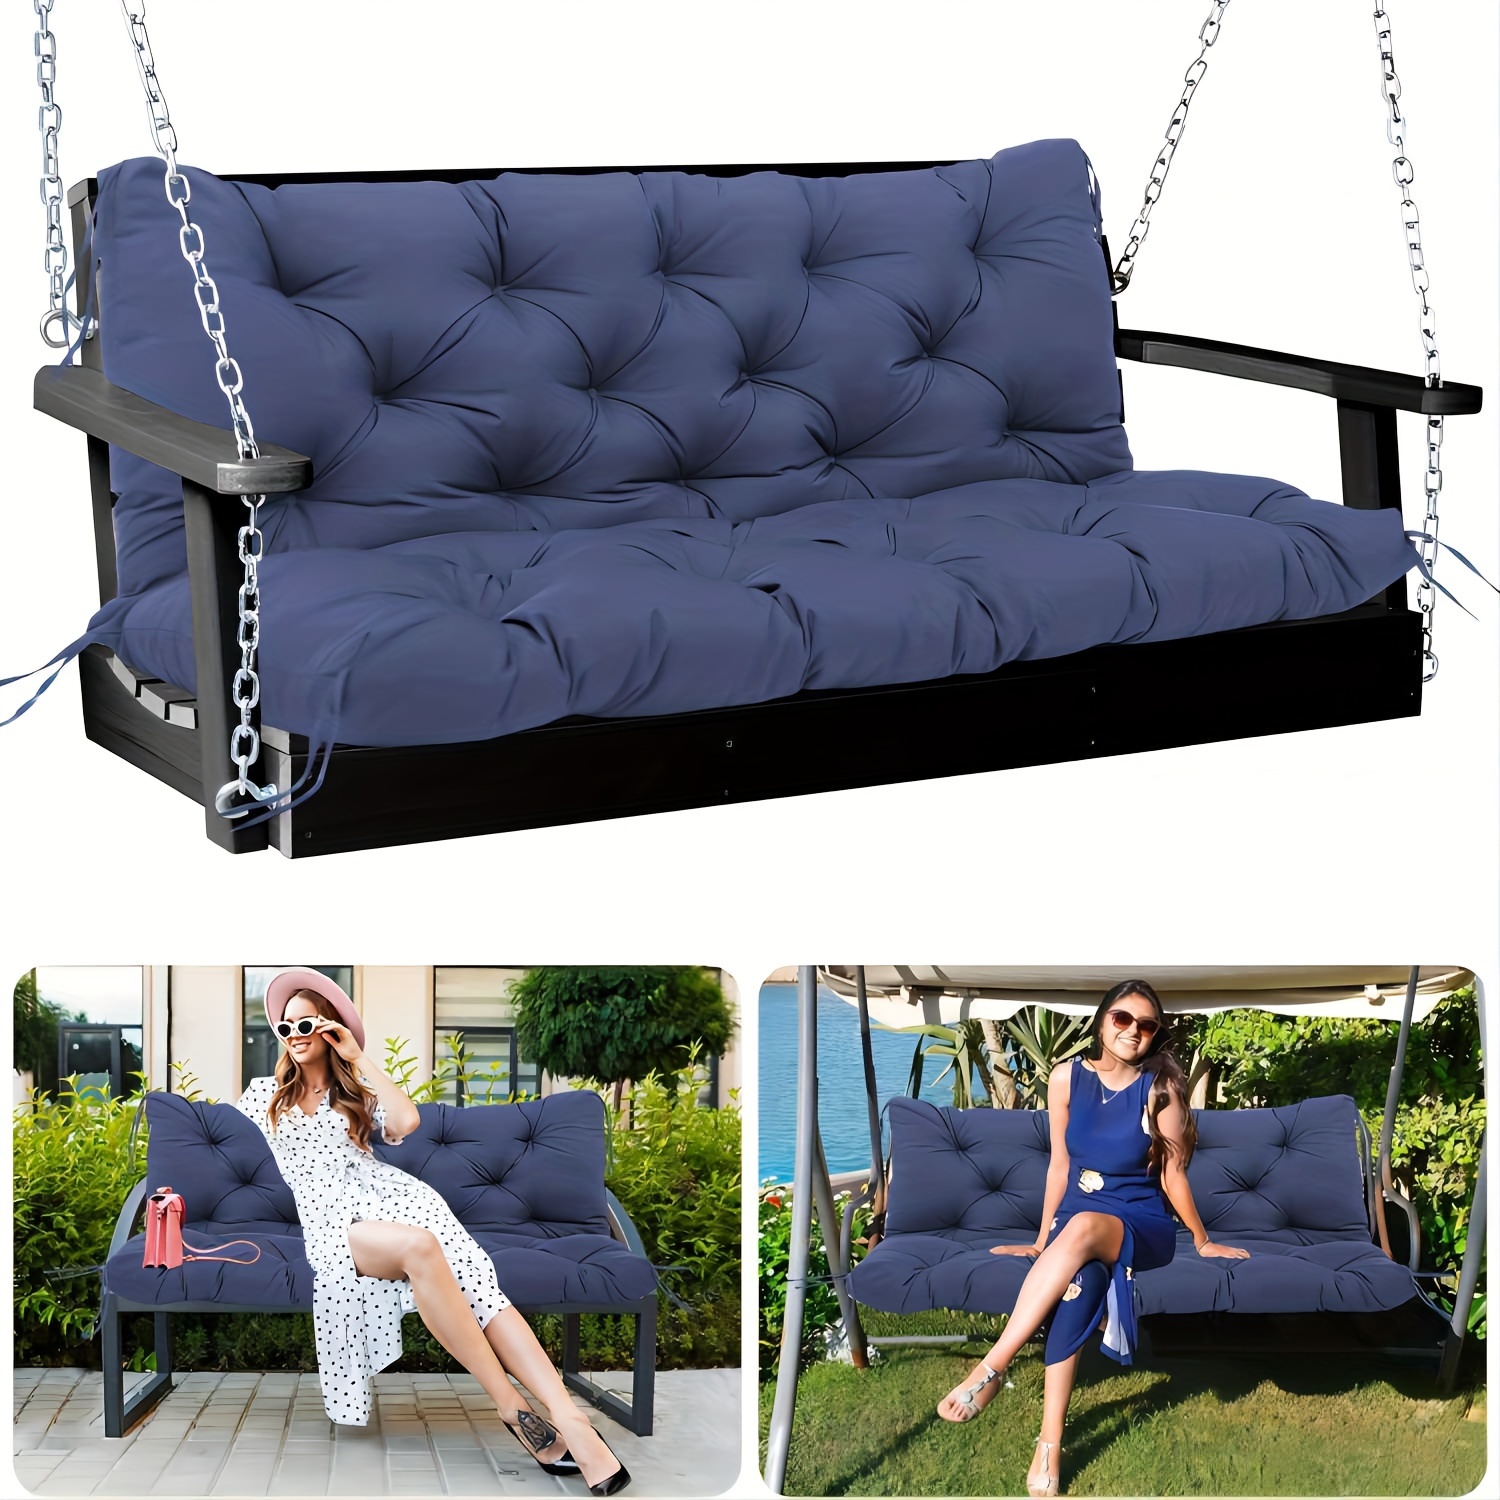 

Outdoor Bench Cushion 60 X 40 Inch Waterproof Patio Furniture Cushions 3- Fastness Garden Sofa Swing Pads With Handle And Adjustable Straps (rain-proof, Fade Resistant)